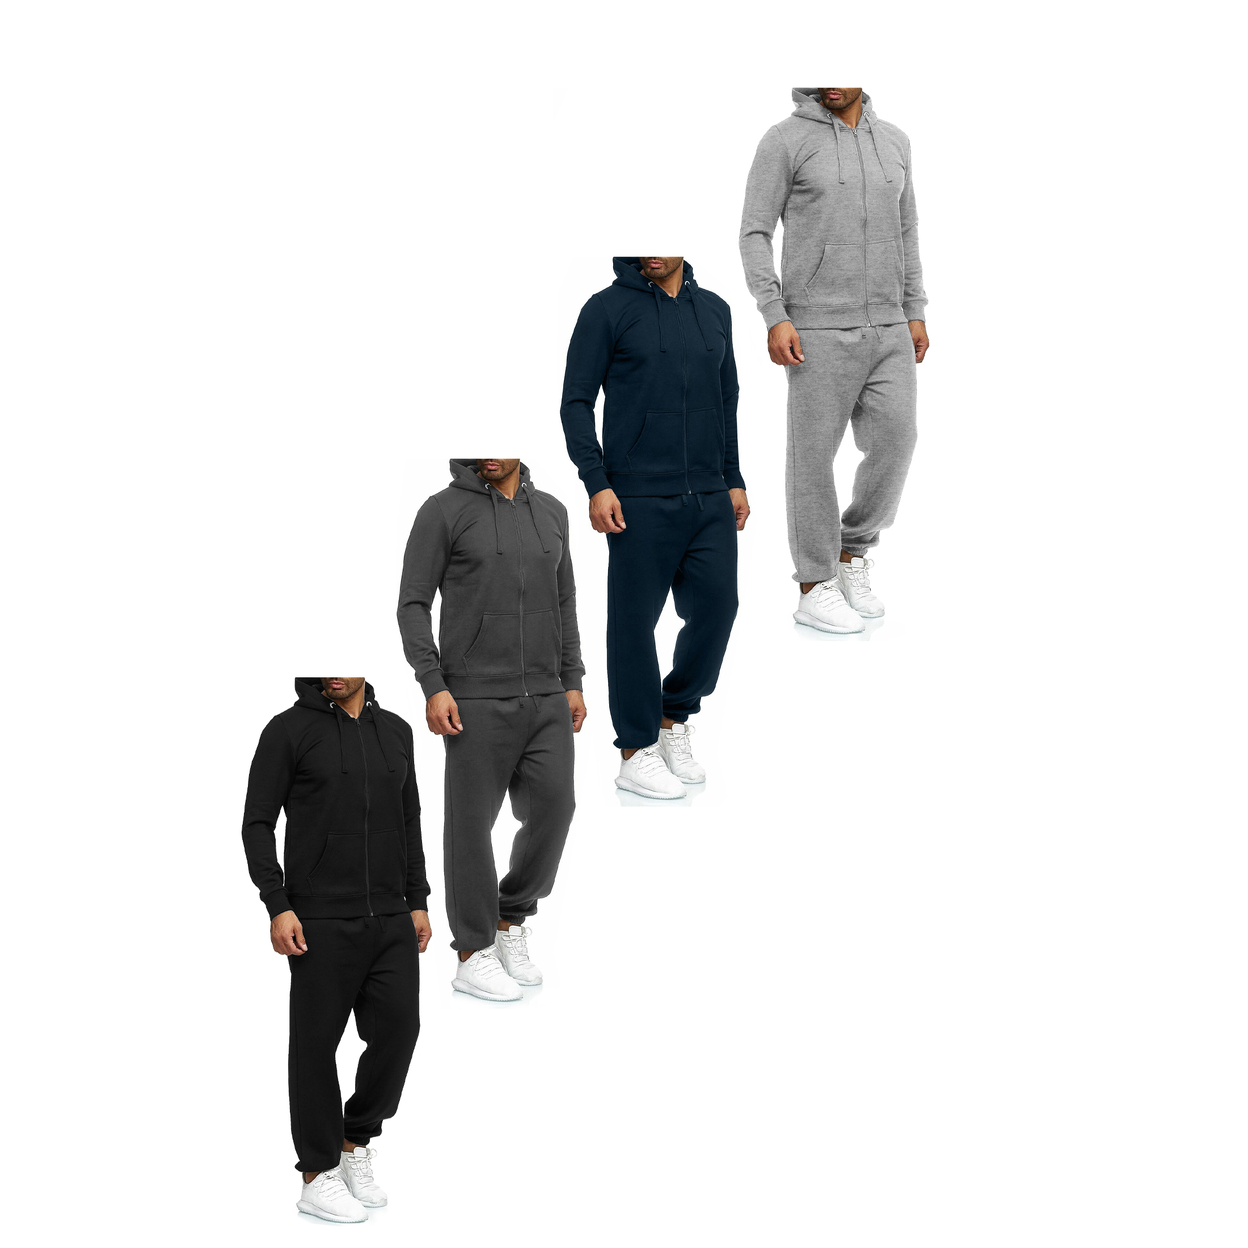 2-Pack: Men's Casual Big & Tall Athletic Active Winter Warm Fleece Lined Full Zip Tracksuit Jogger Set - Navy, X-large